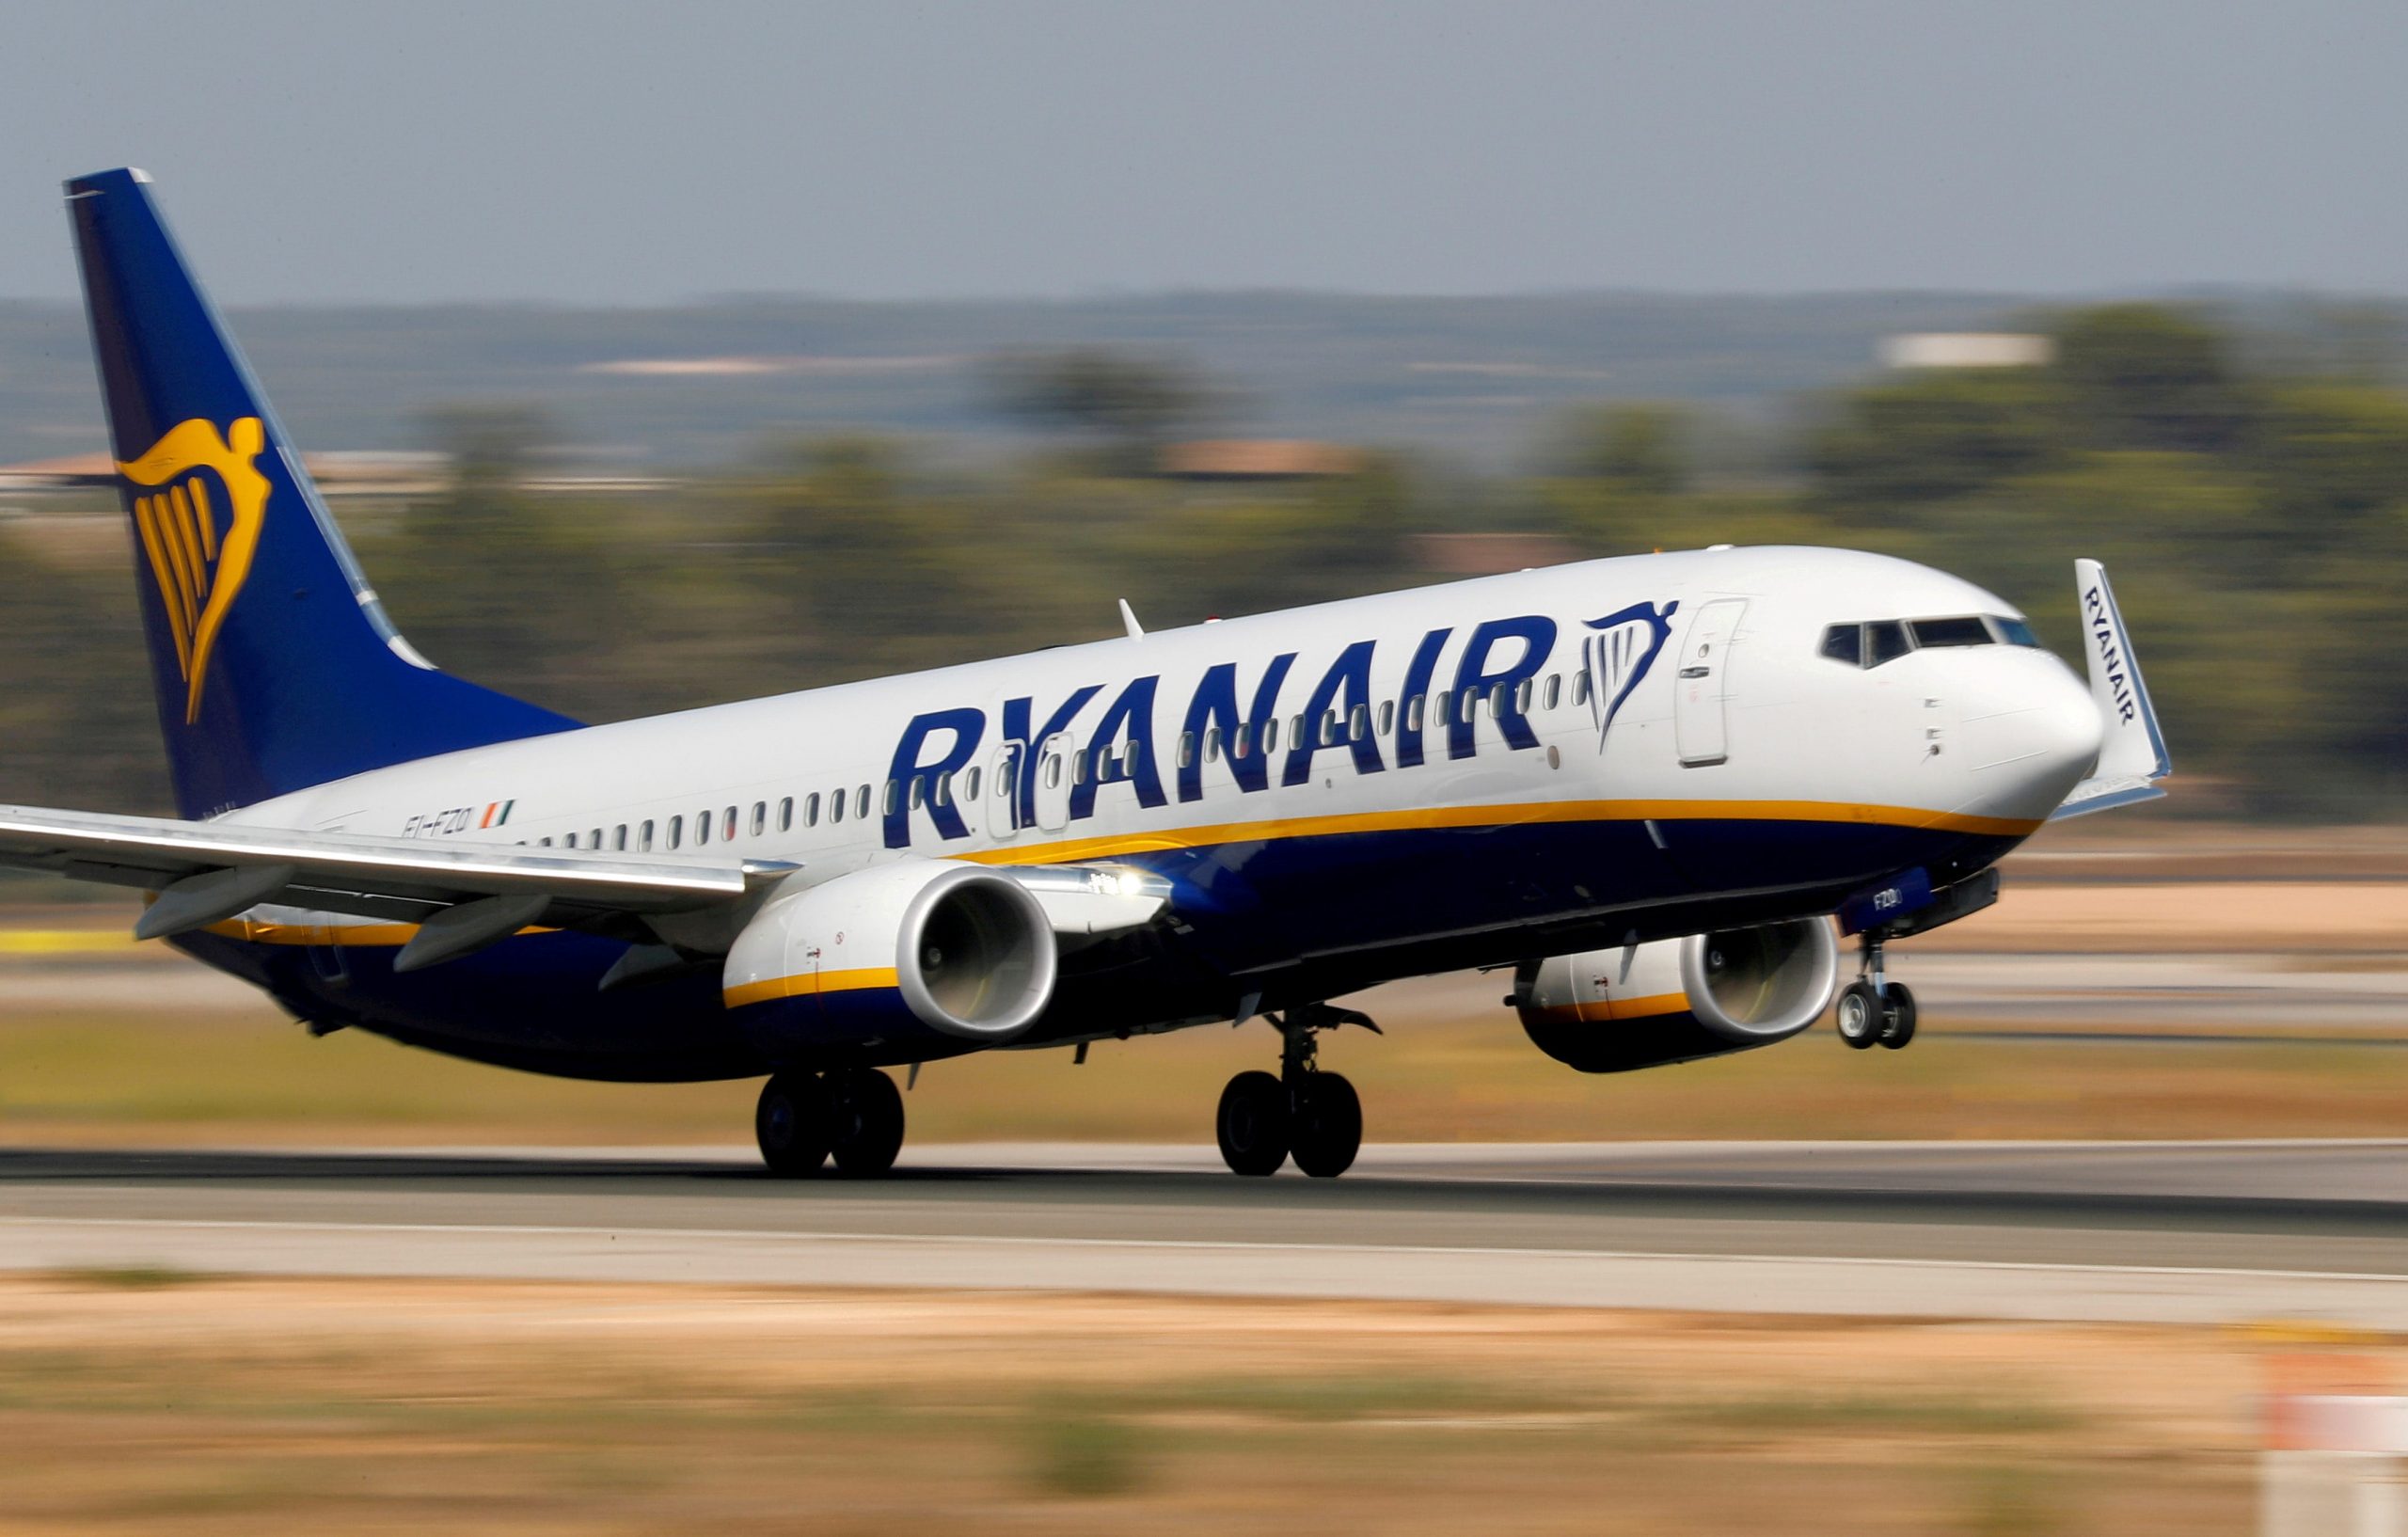 A blue, white, and yellow Ryanair plan takes off from the runway.